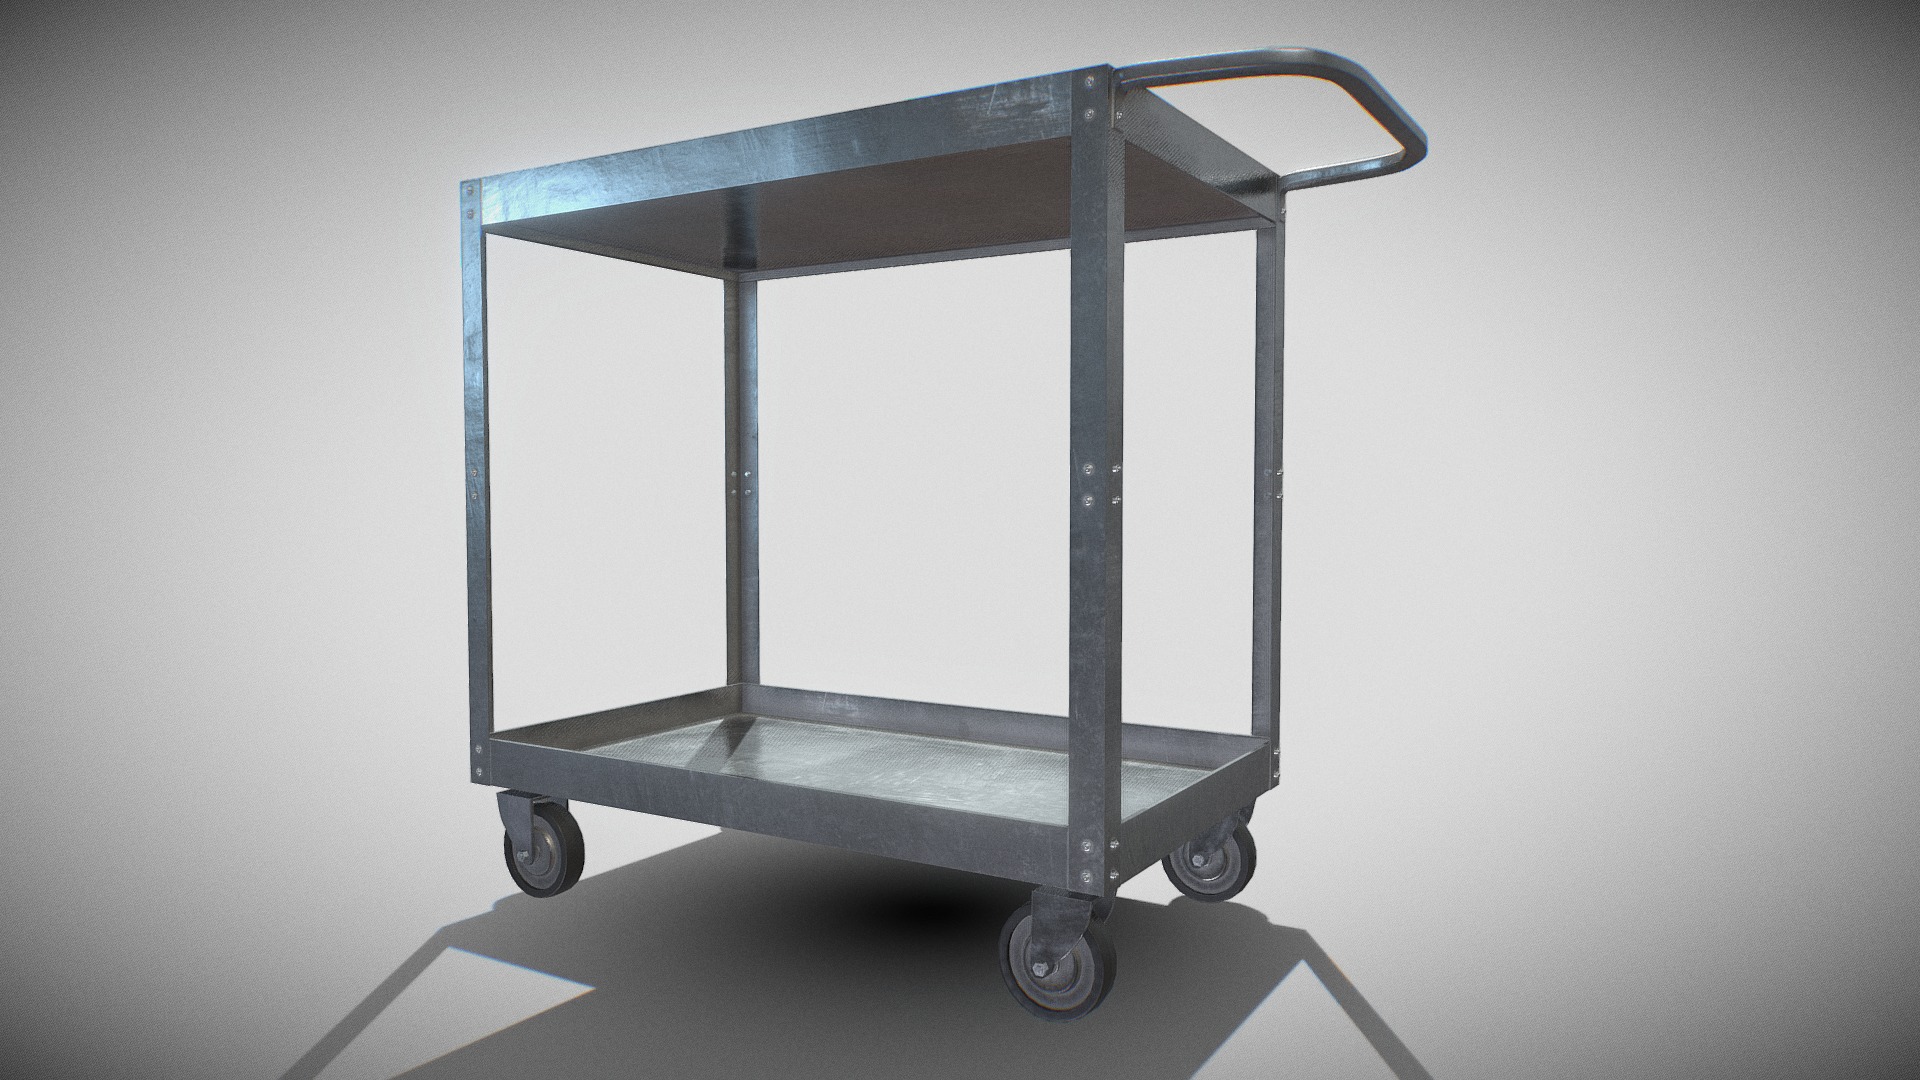 3D model SteelCart - This is a 3D model of the SteelCart. The 3D model is about a metal cart on wheels.